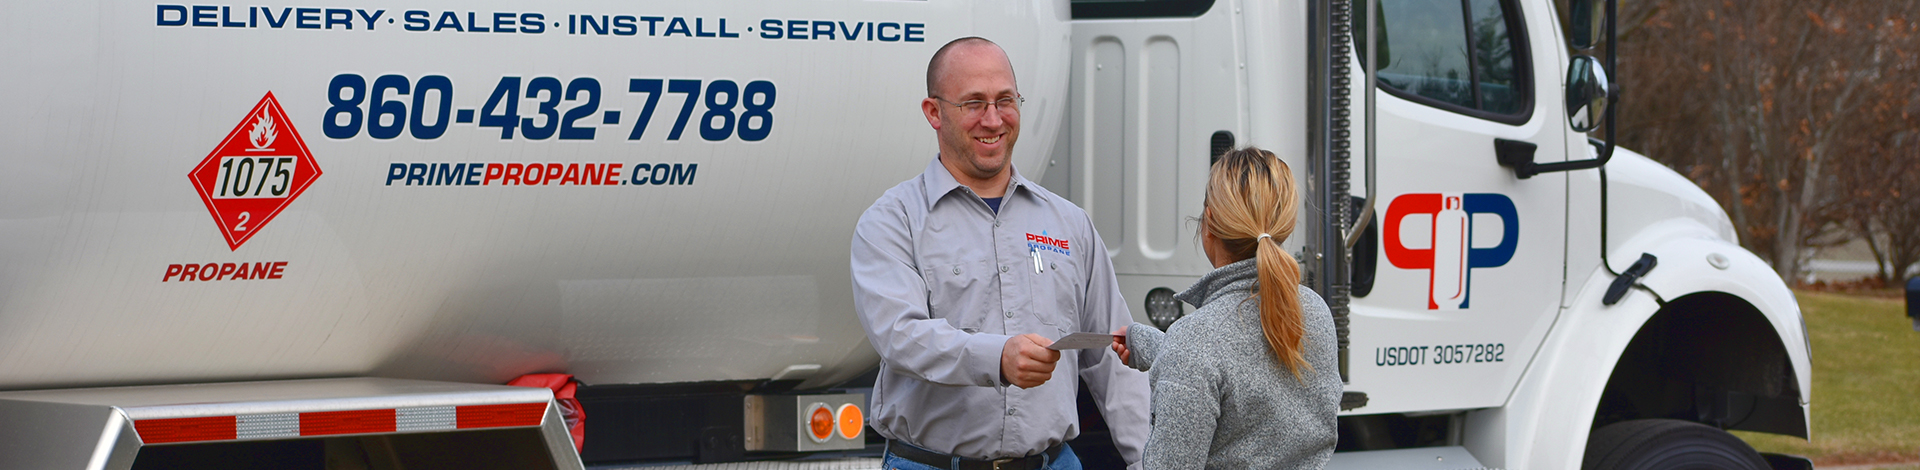 Request propane delivery to your door.